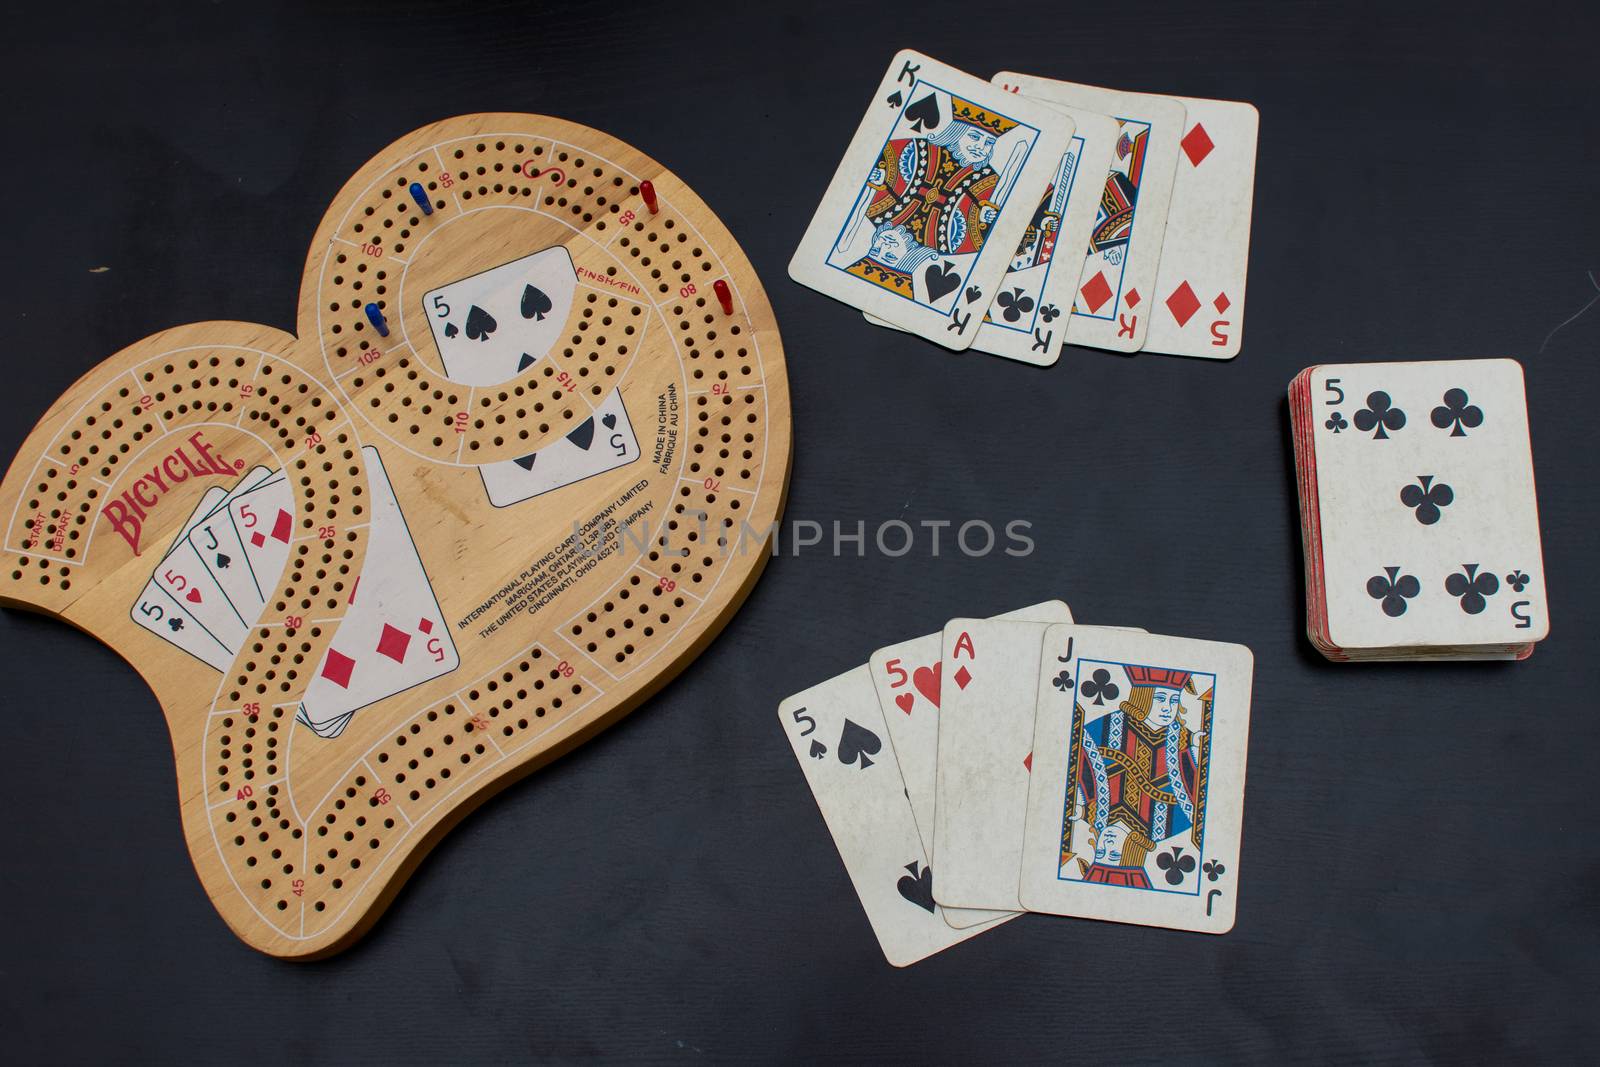 RAK, RAK/UAE - 4/20/2019: "Top view of a Cribbage card game and board up close looking at the blue and red pegs with an excellent best card hand of 29 points, fives and a jack."